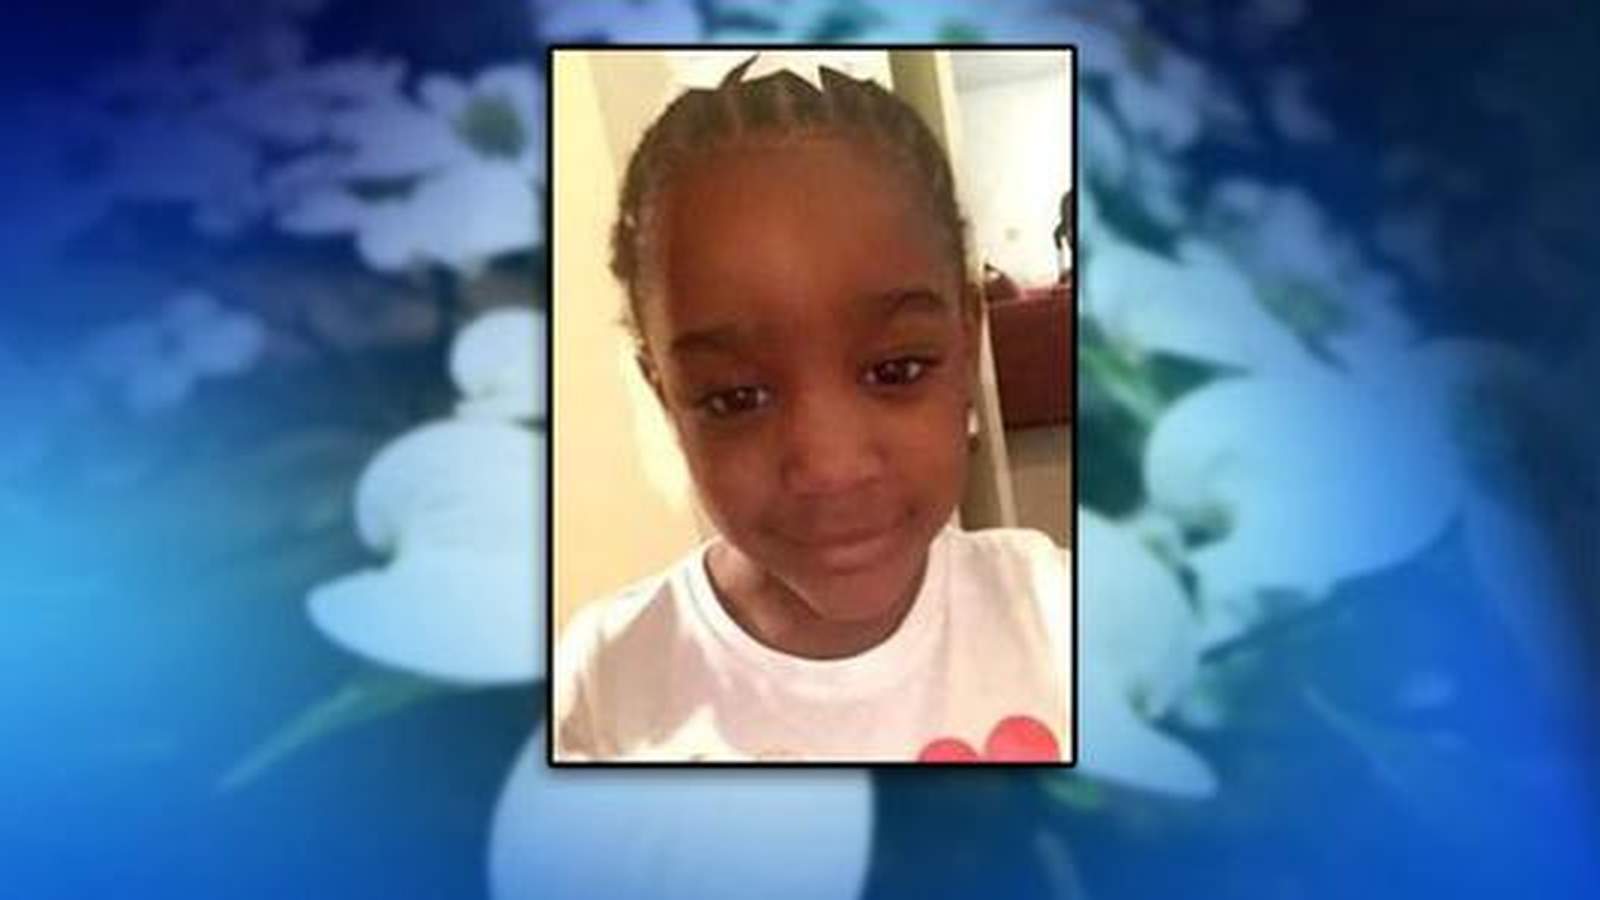 Remains found in Alabama identified as 5-year-old Taylor Williams